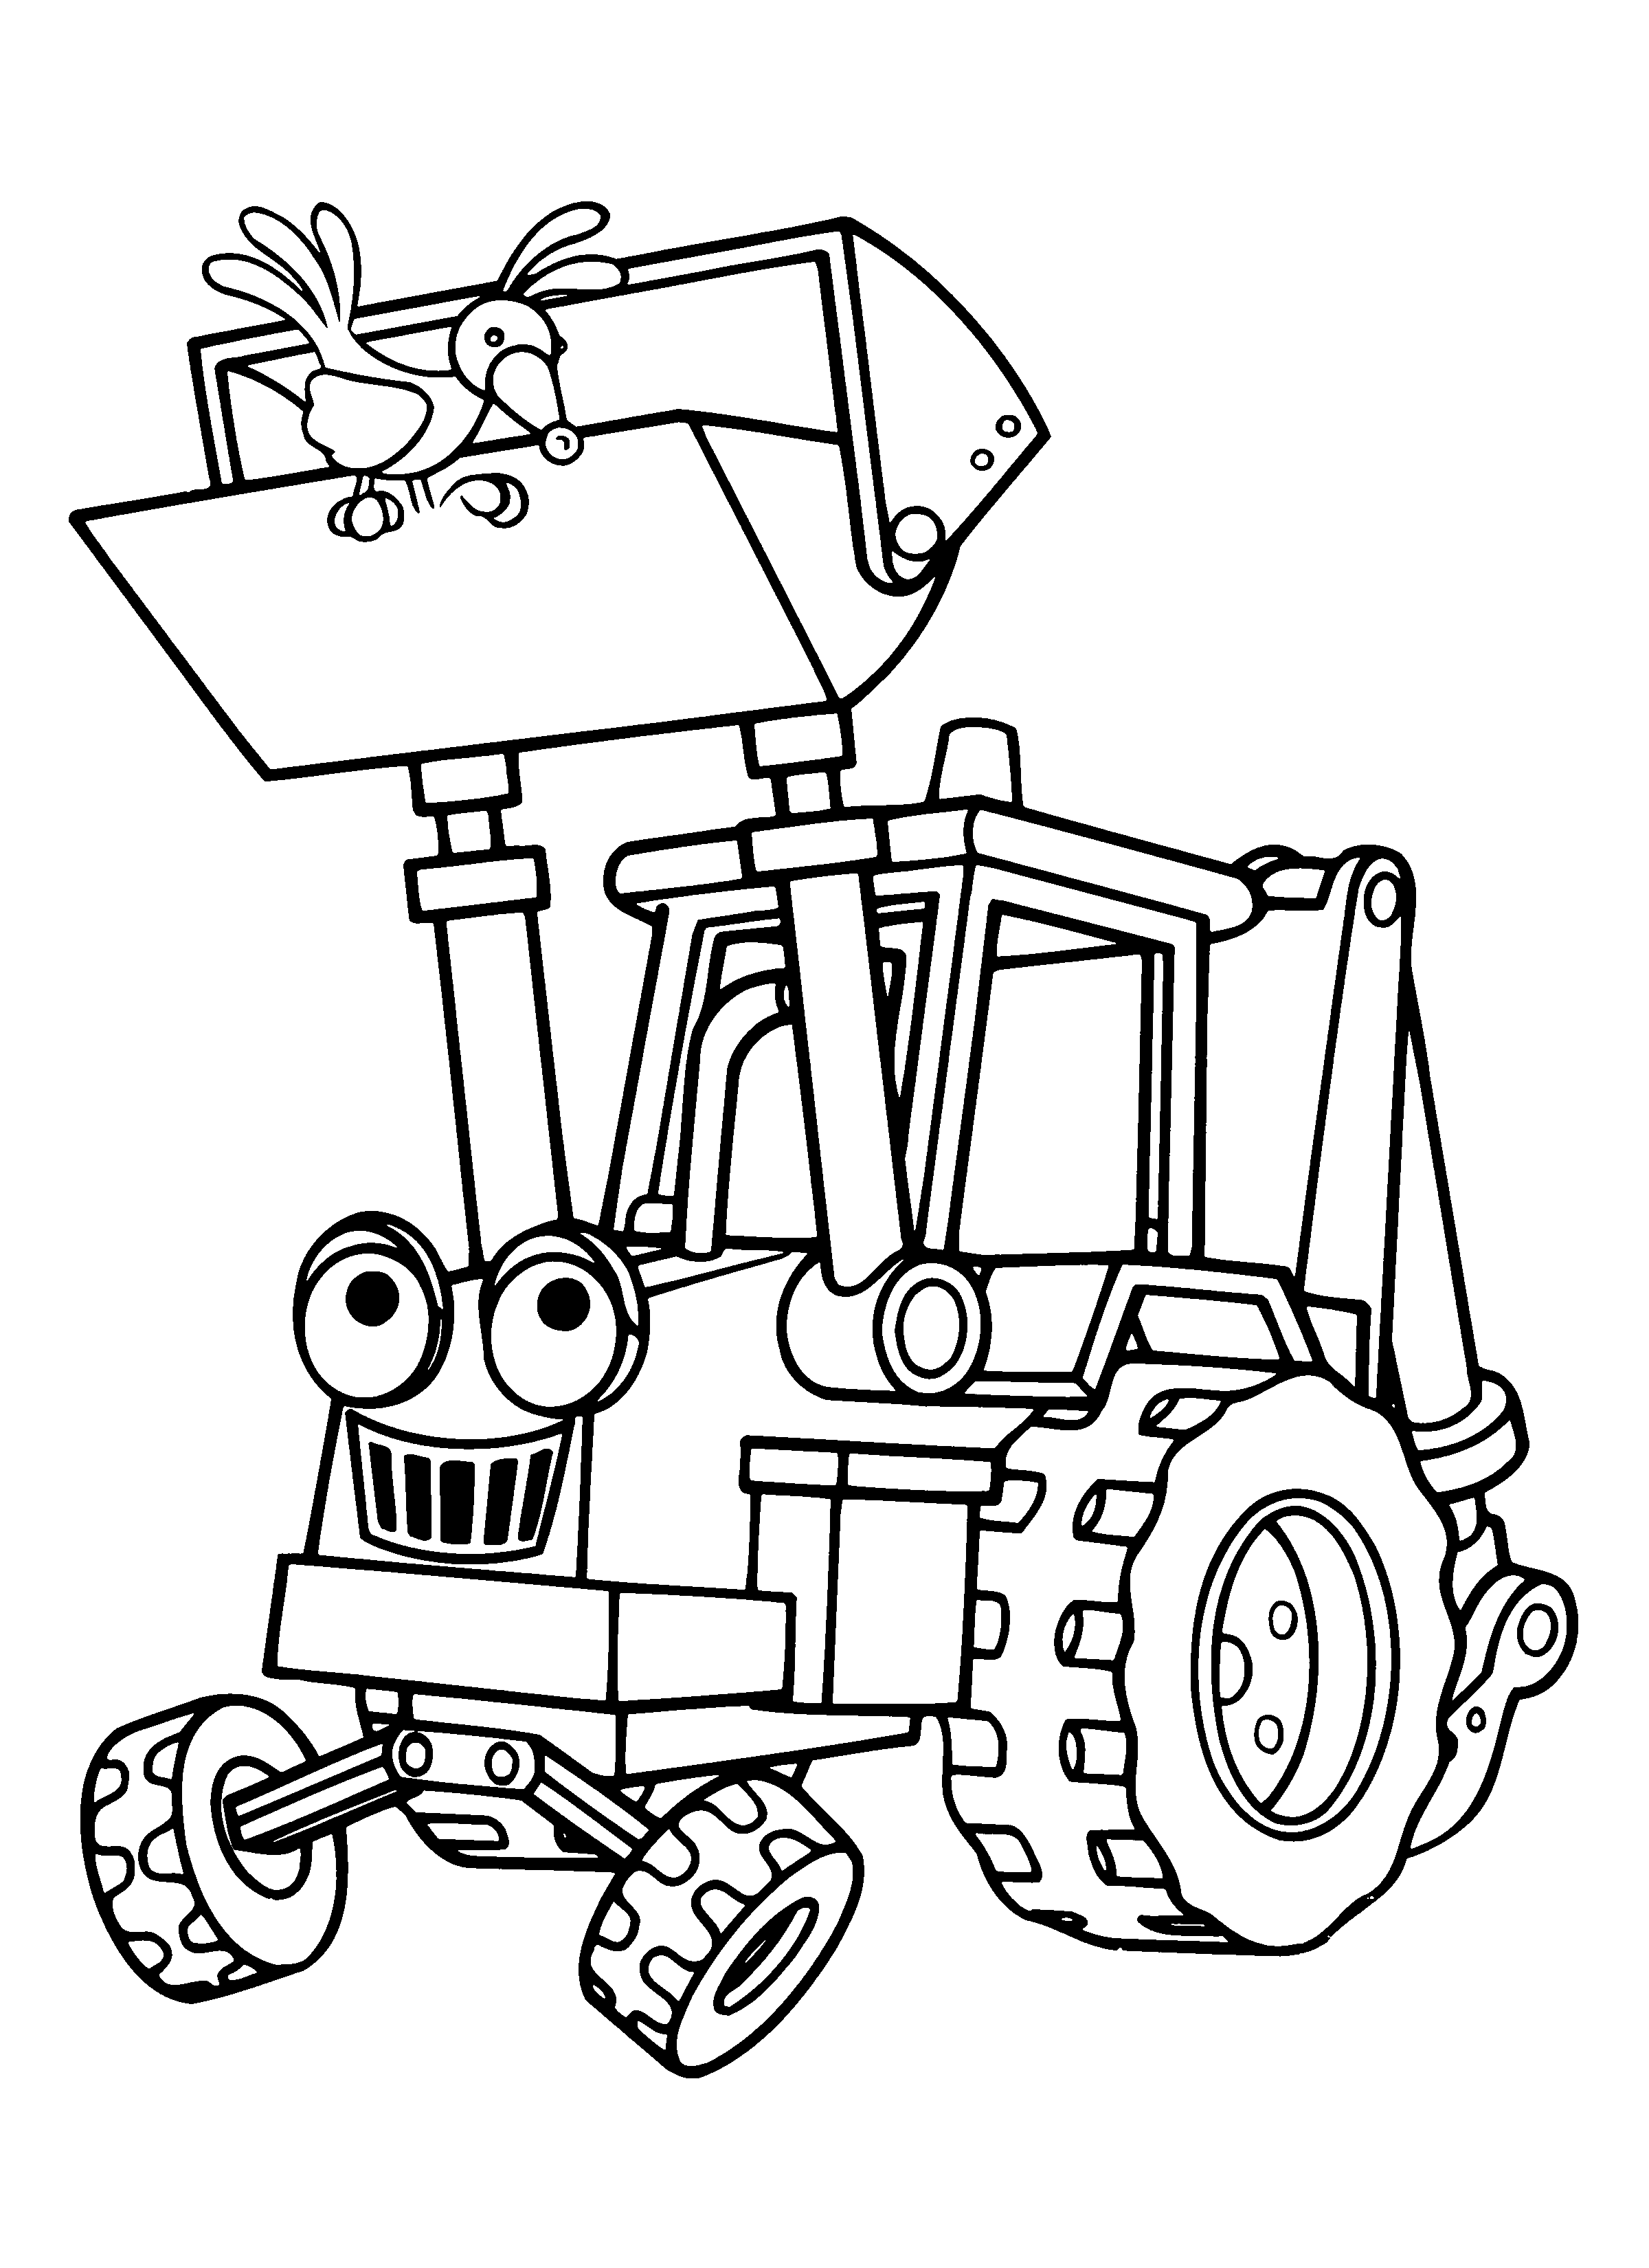 Coloring Page - Bob the builder coloring pages 40